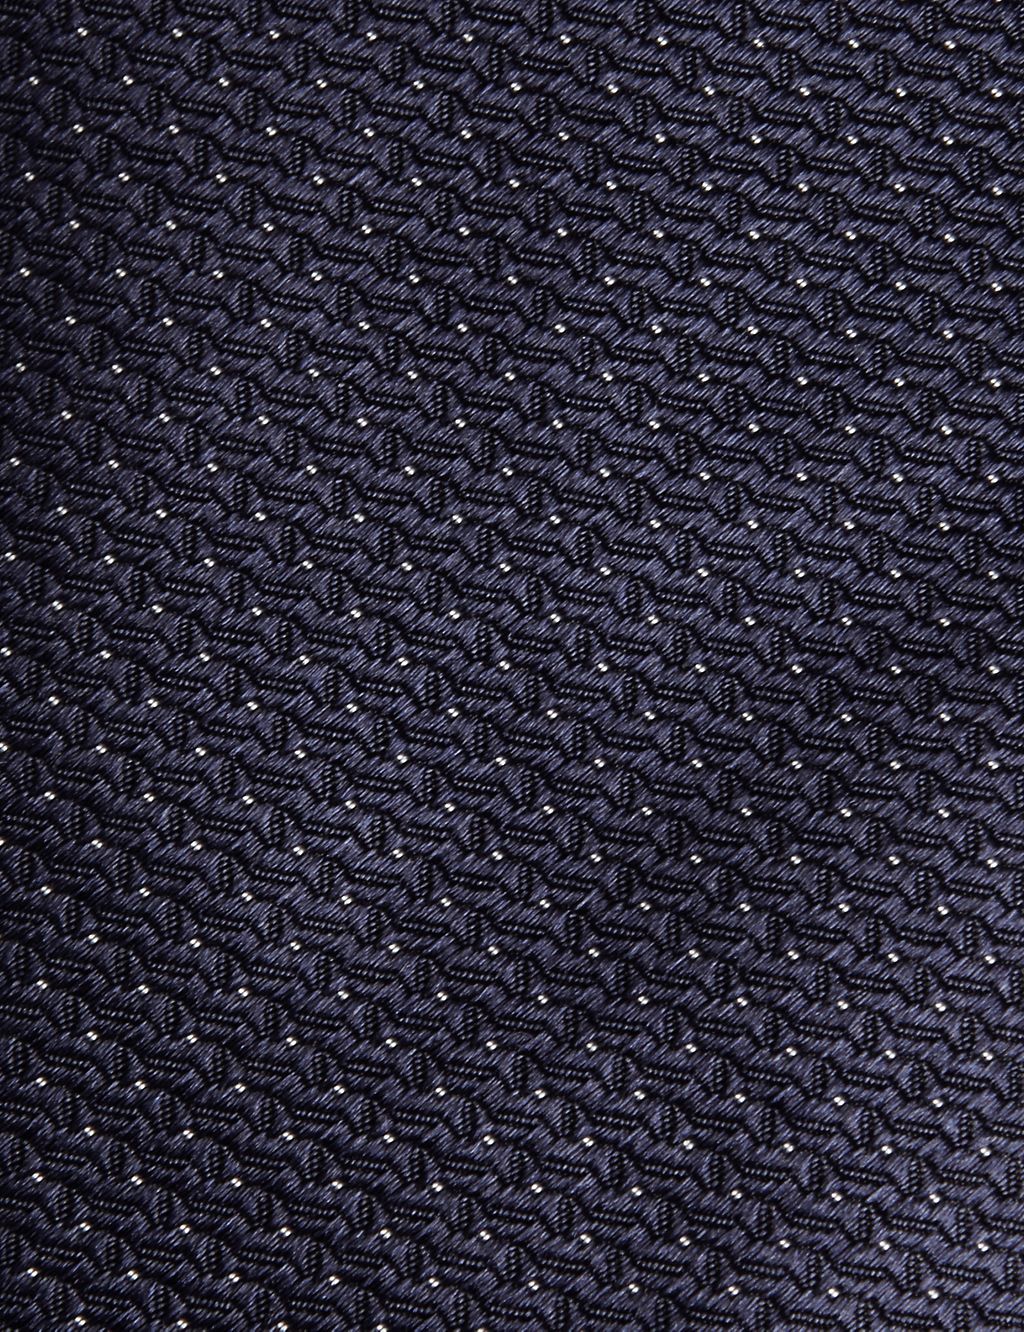 Pure Silk Micro Dotted Tie 2 of 4